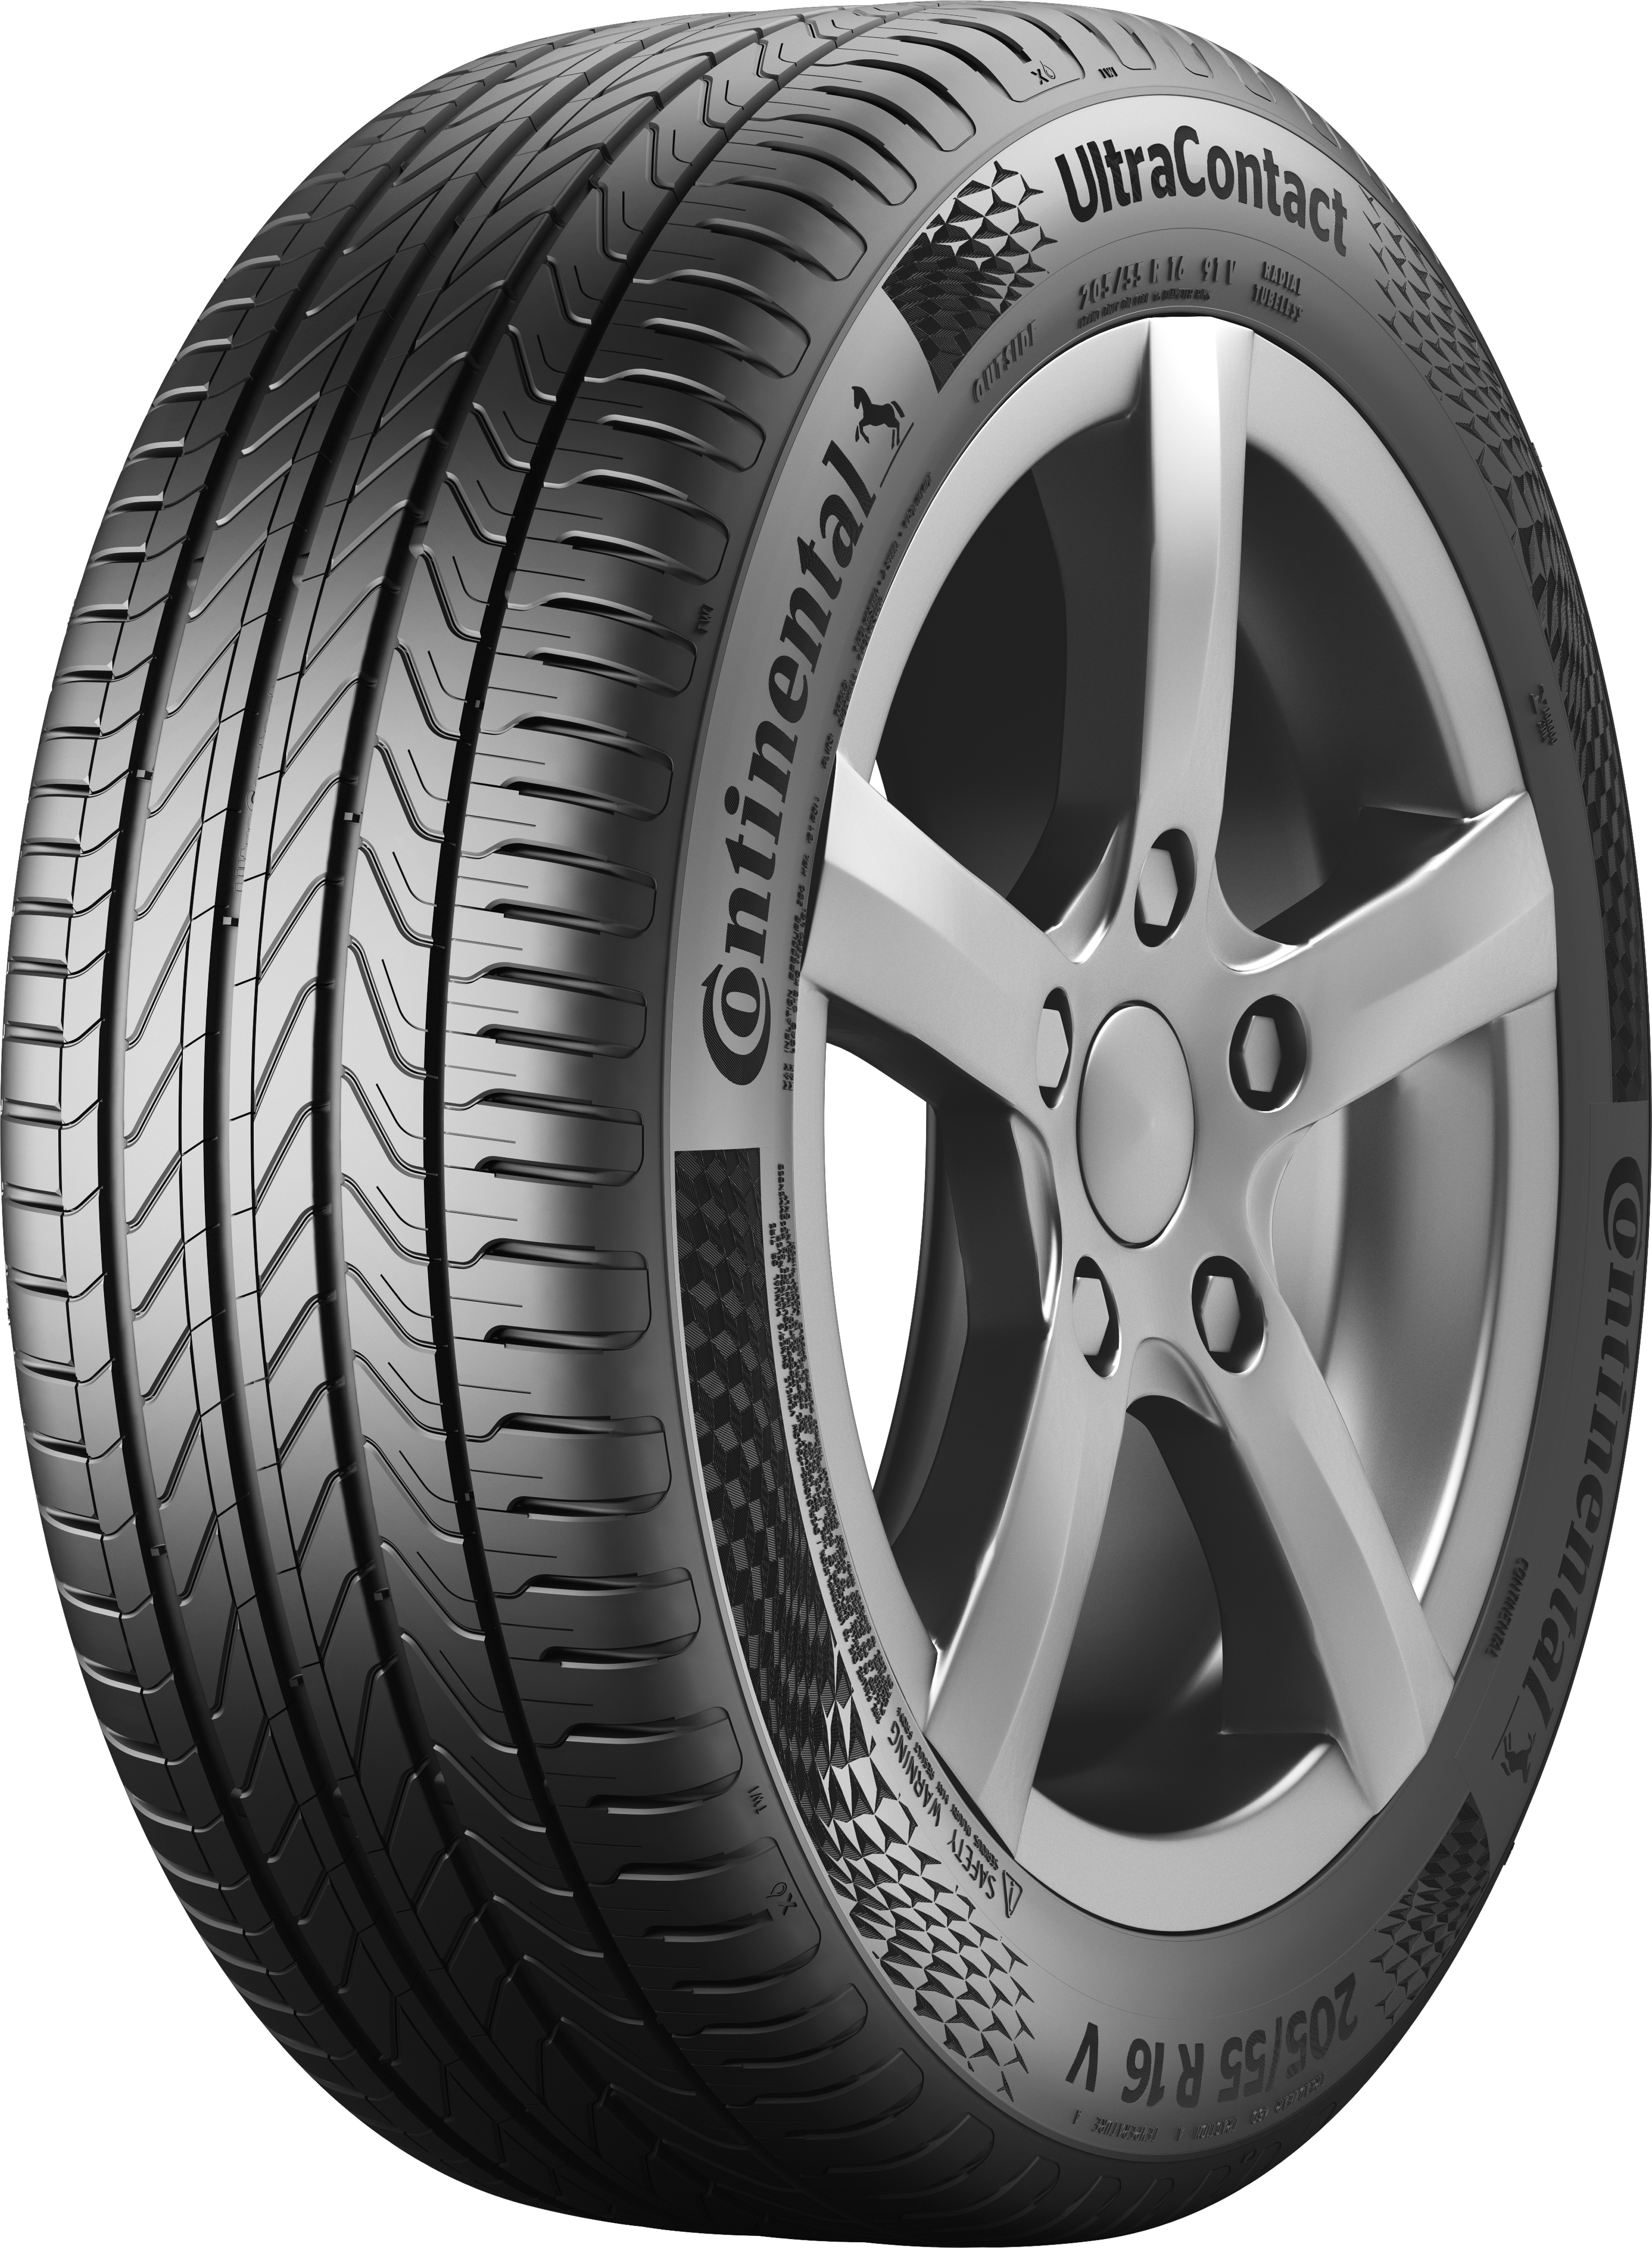 - summer Continental AG tire UltraContact The Continental new